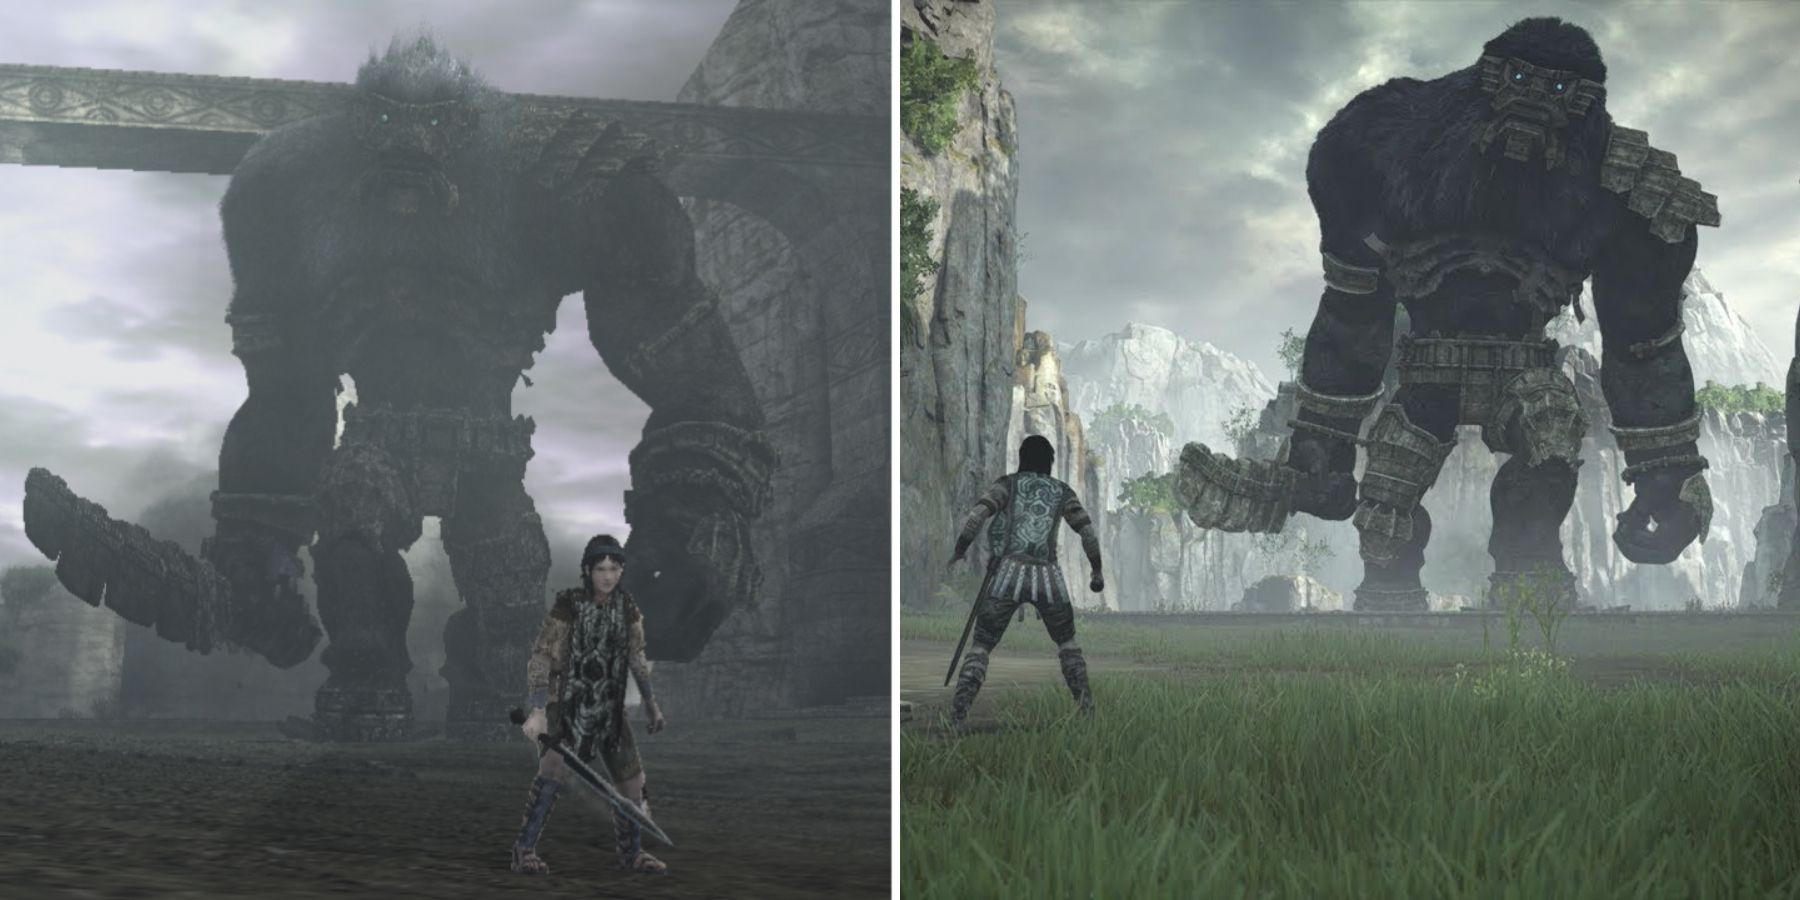 Wander encountering the 15th Colossus, Argus, in Shadow of the Colossus